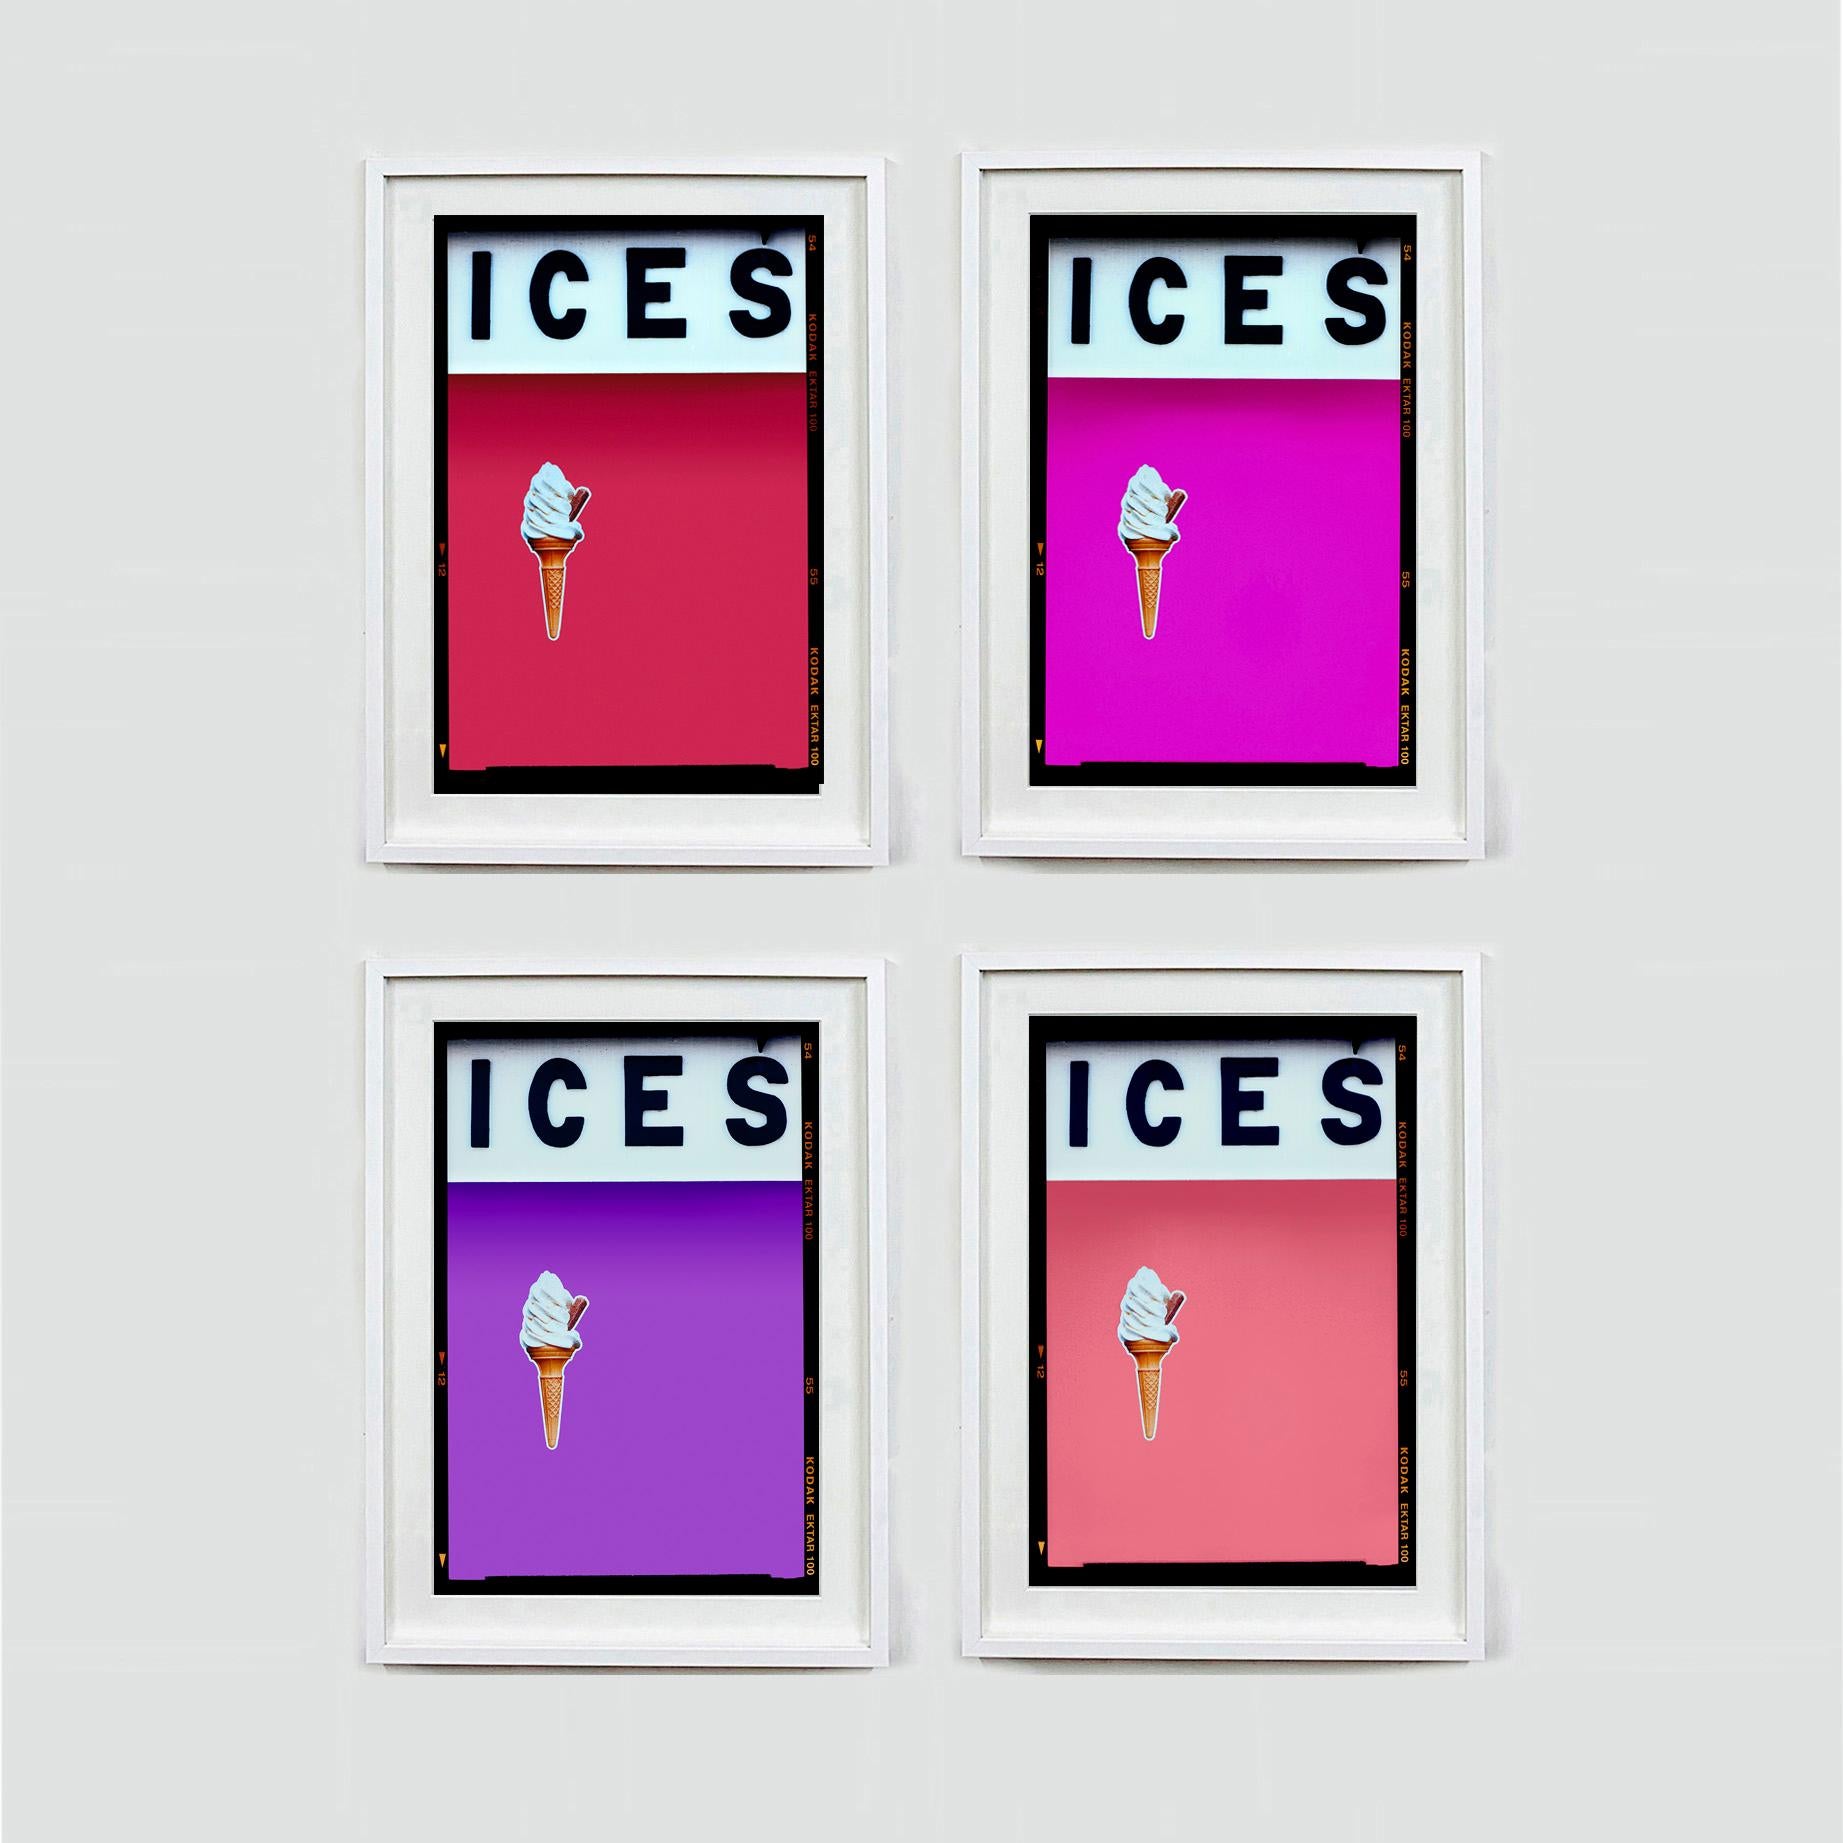 ICES - Four Framed Artworks, Photographs by Richard Heeps. 
Featured here Raspberry, Pink, Lilac and Coral. Get in touch to request other sizes or color combinations.

Each artwork measures 21.25